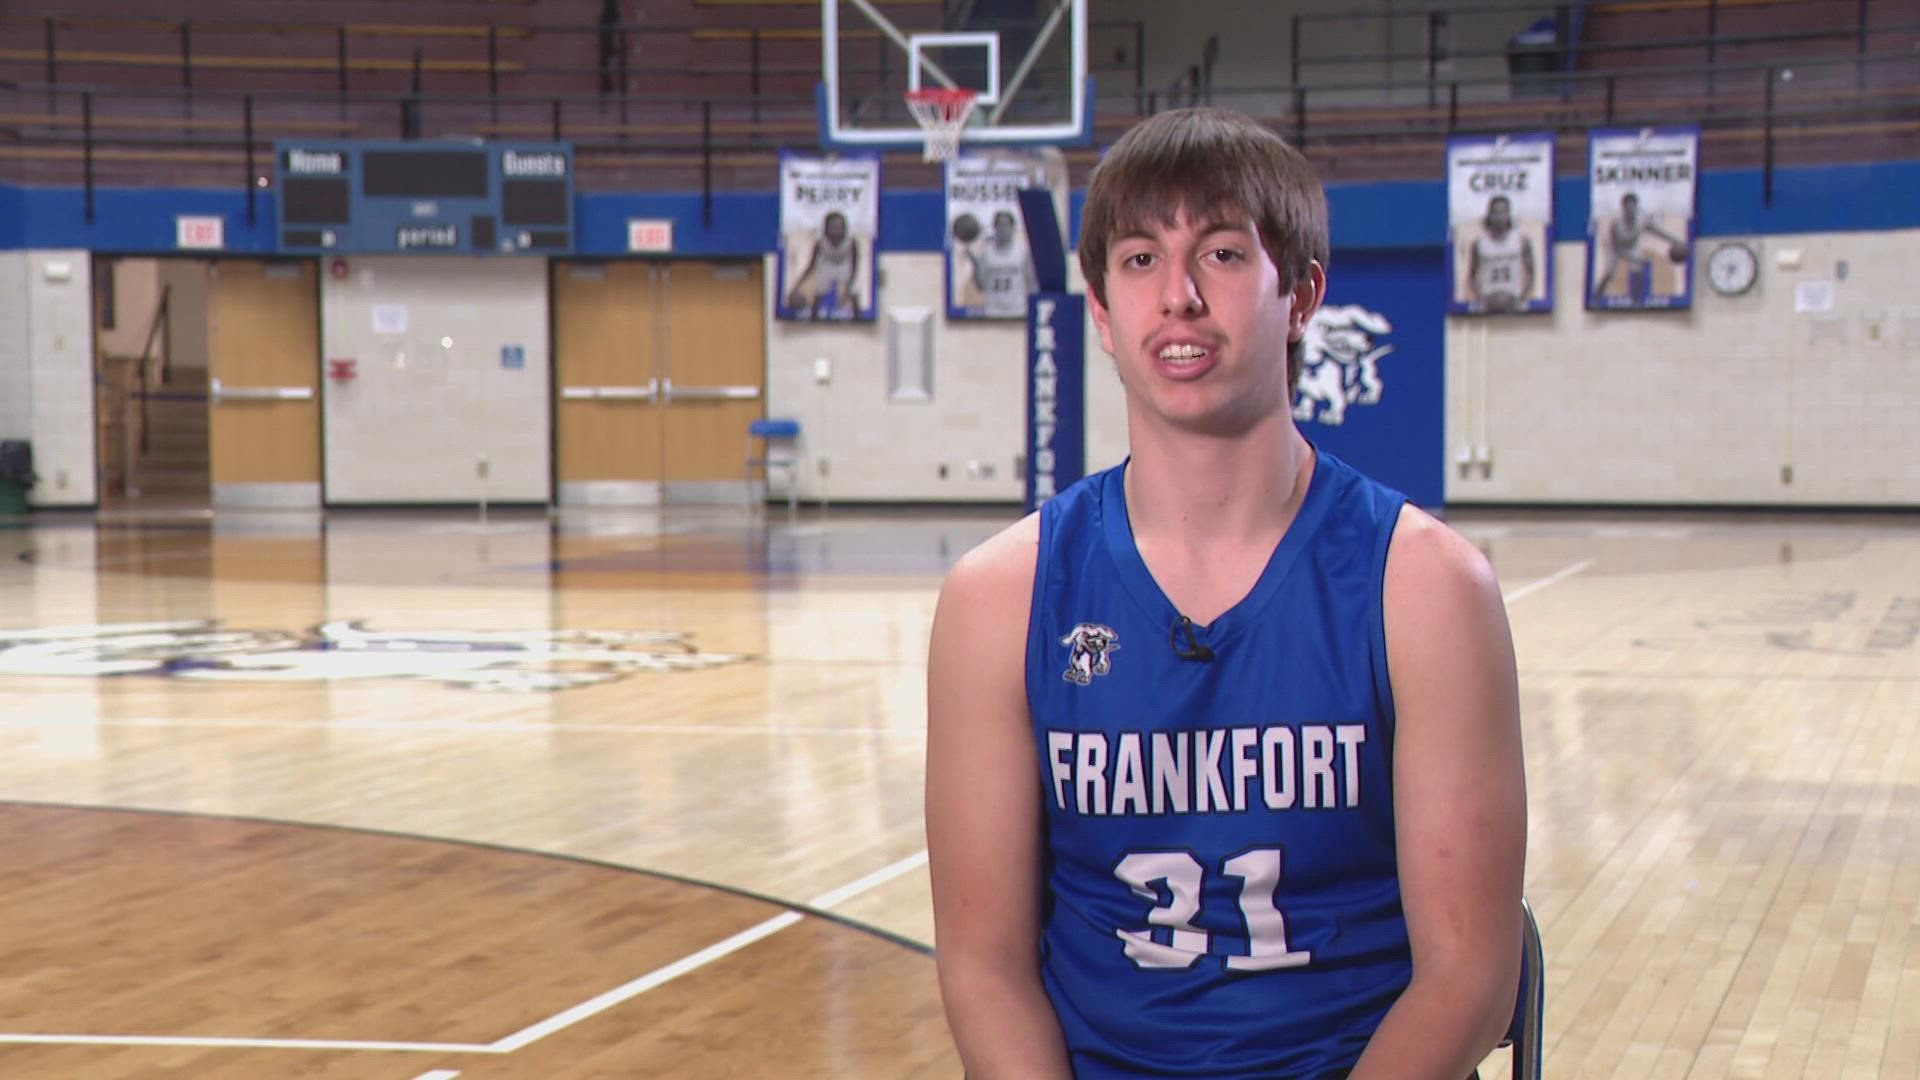 A year ago today, Frankfort High School Senior Jayden Skinner wasn't sure if he'd play baseball or basketball again. But now he's back on the mend.